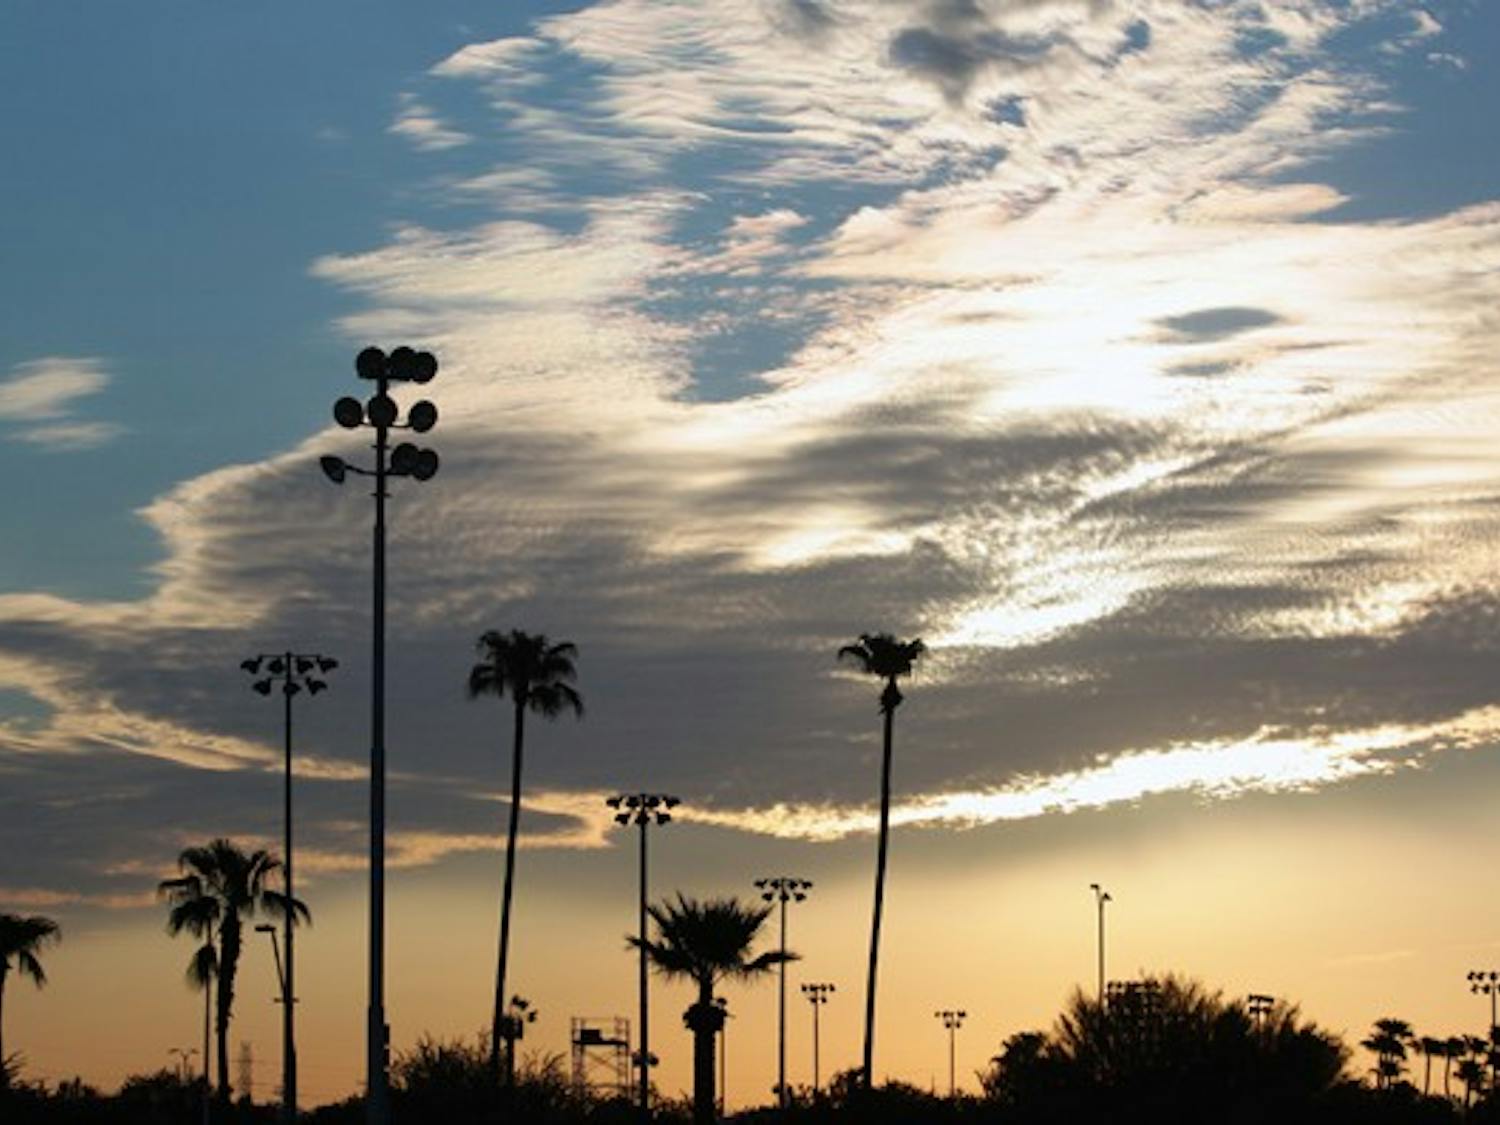 RISE N' SHINE: Palm trees outside of the Sun Angel Stadium are silhouetted as the sun rises over Arizona Sept. 7. (Photo by Beth Easterbrook)